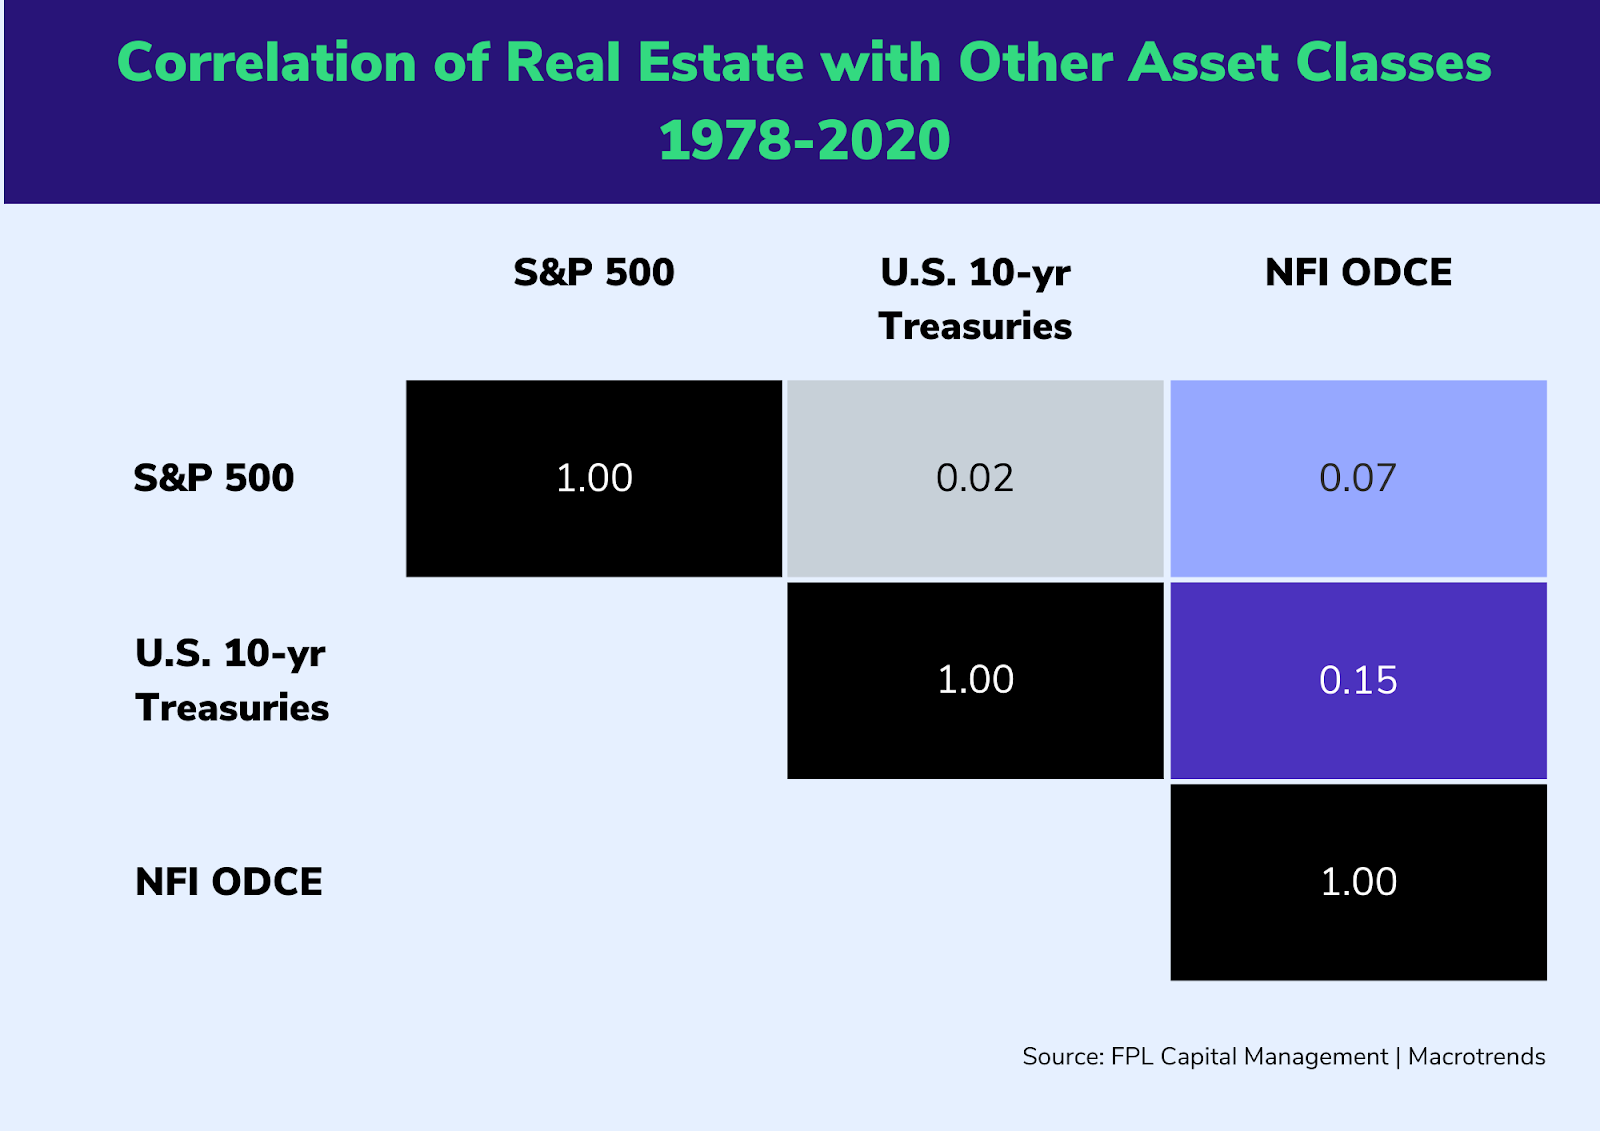 Correlation of Real Estate with Other Asset Classes 1978-2020